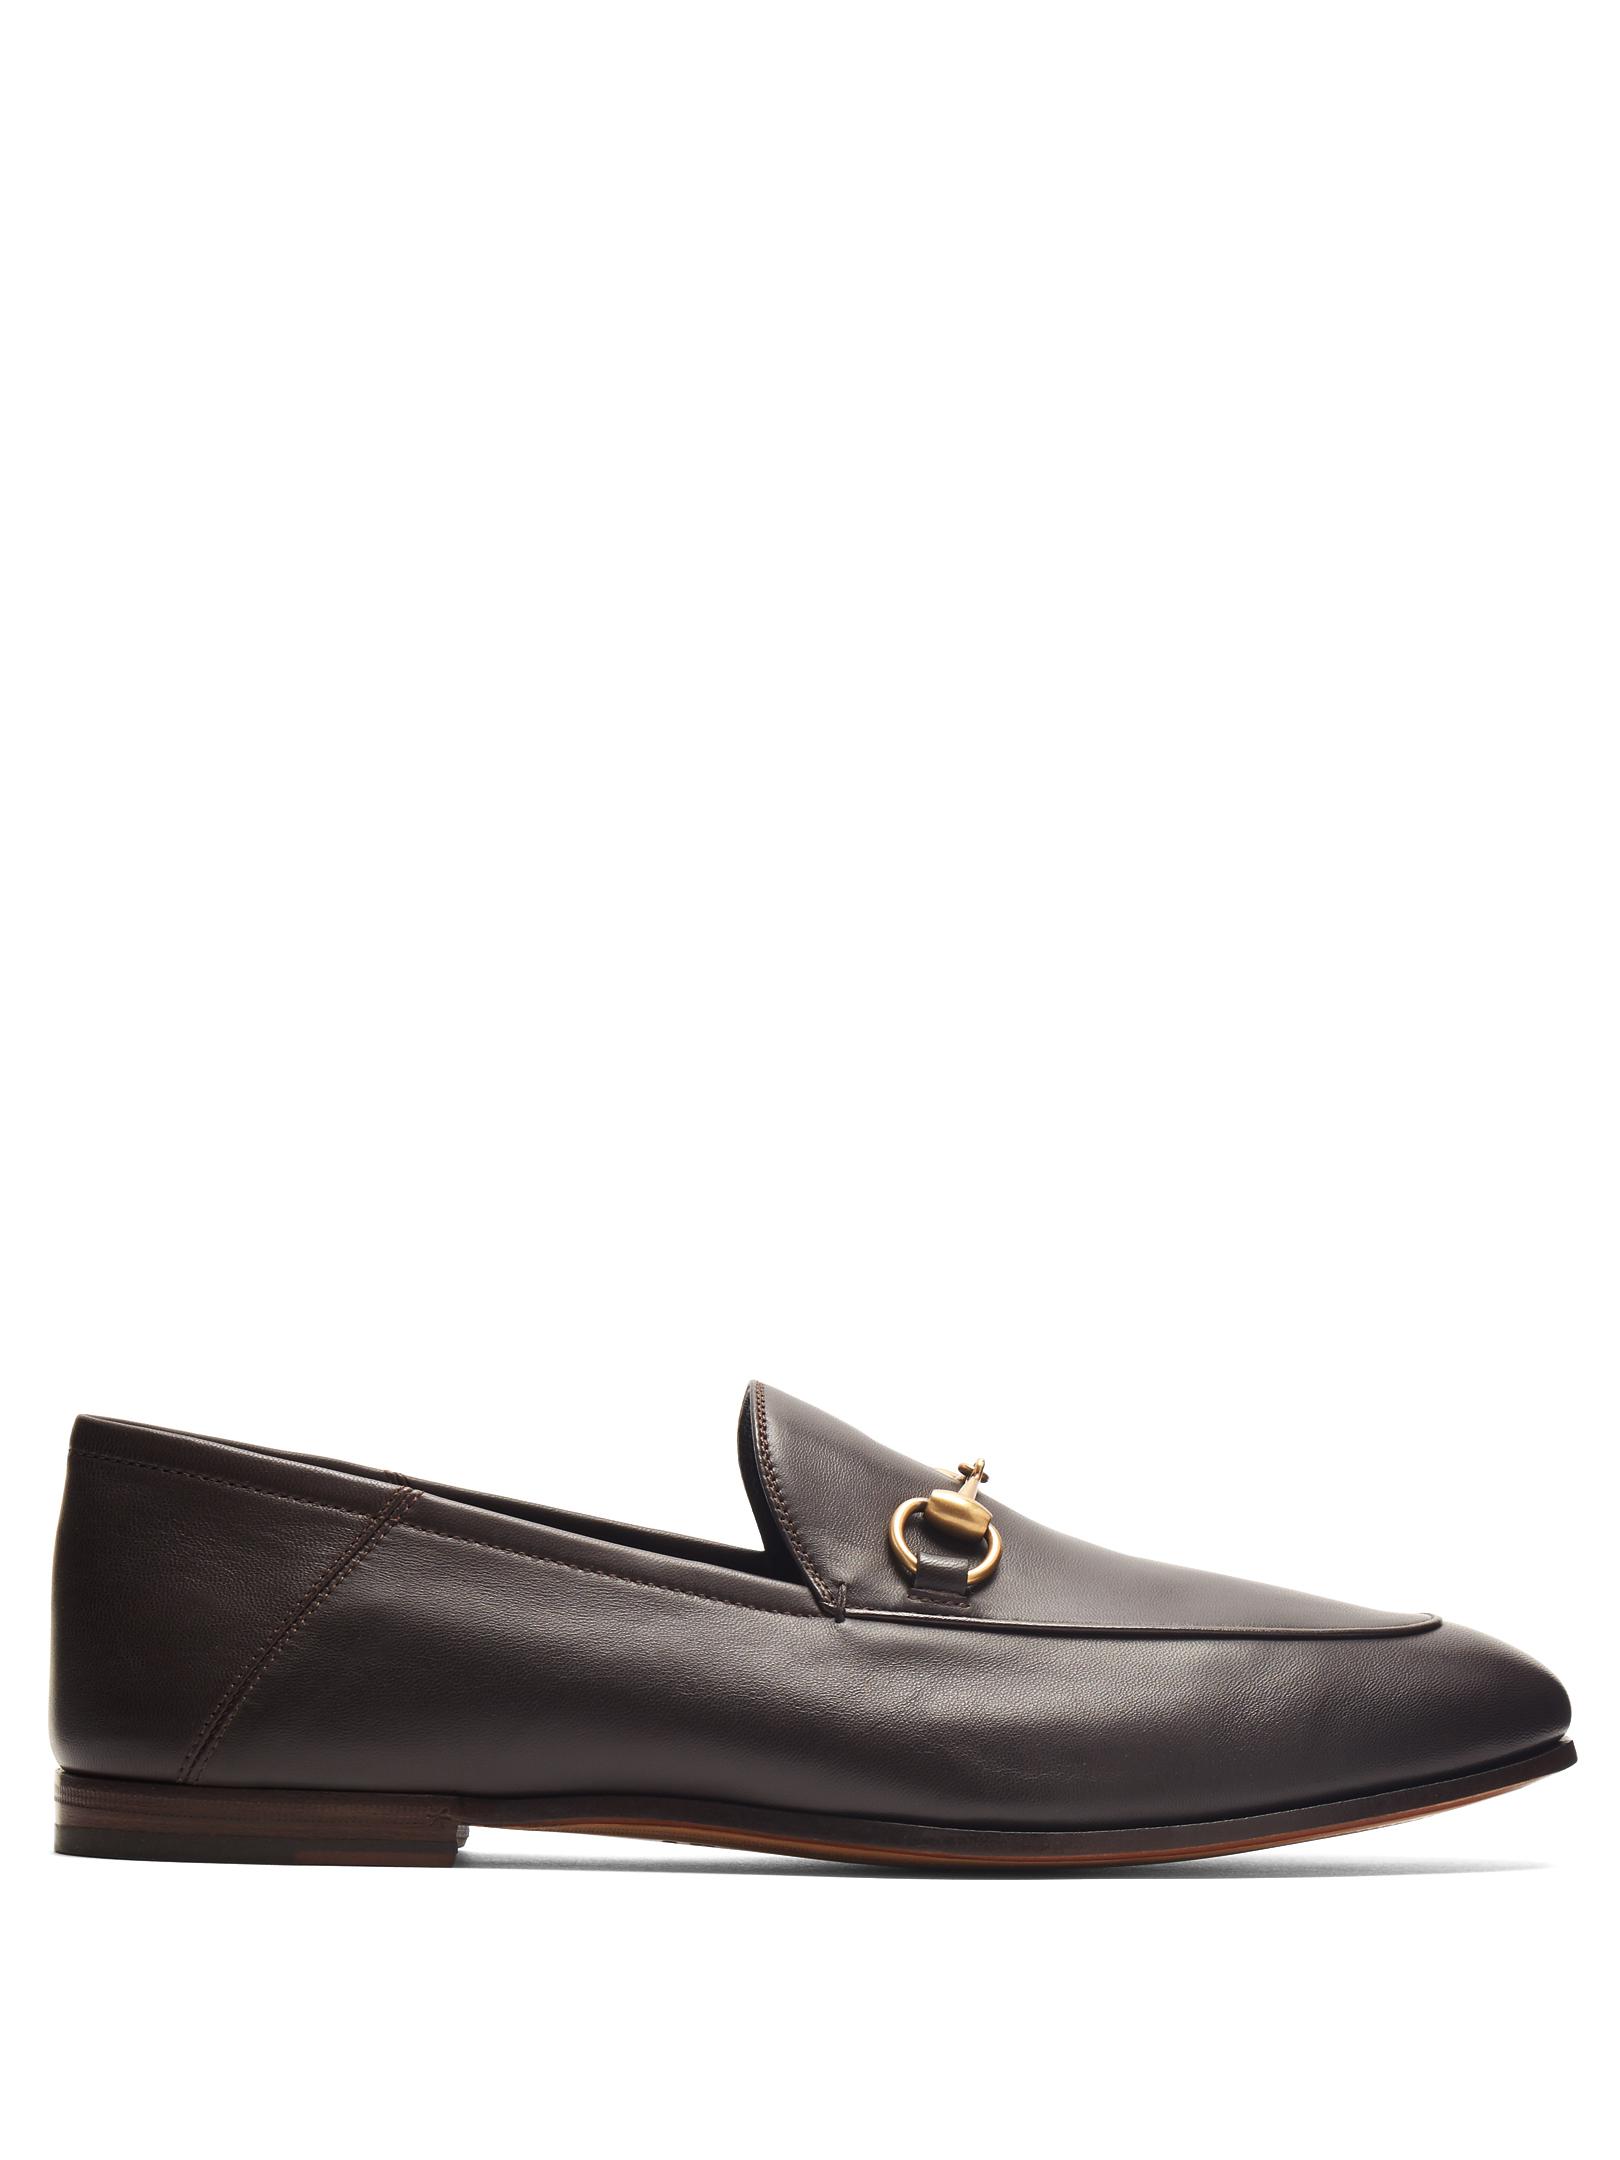 Gucci Brixton Leather Loafers in Brown for Men - Lyst